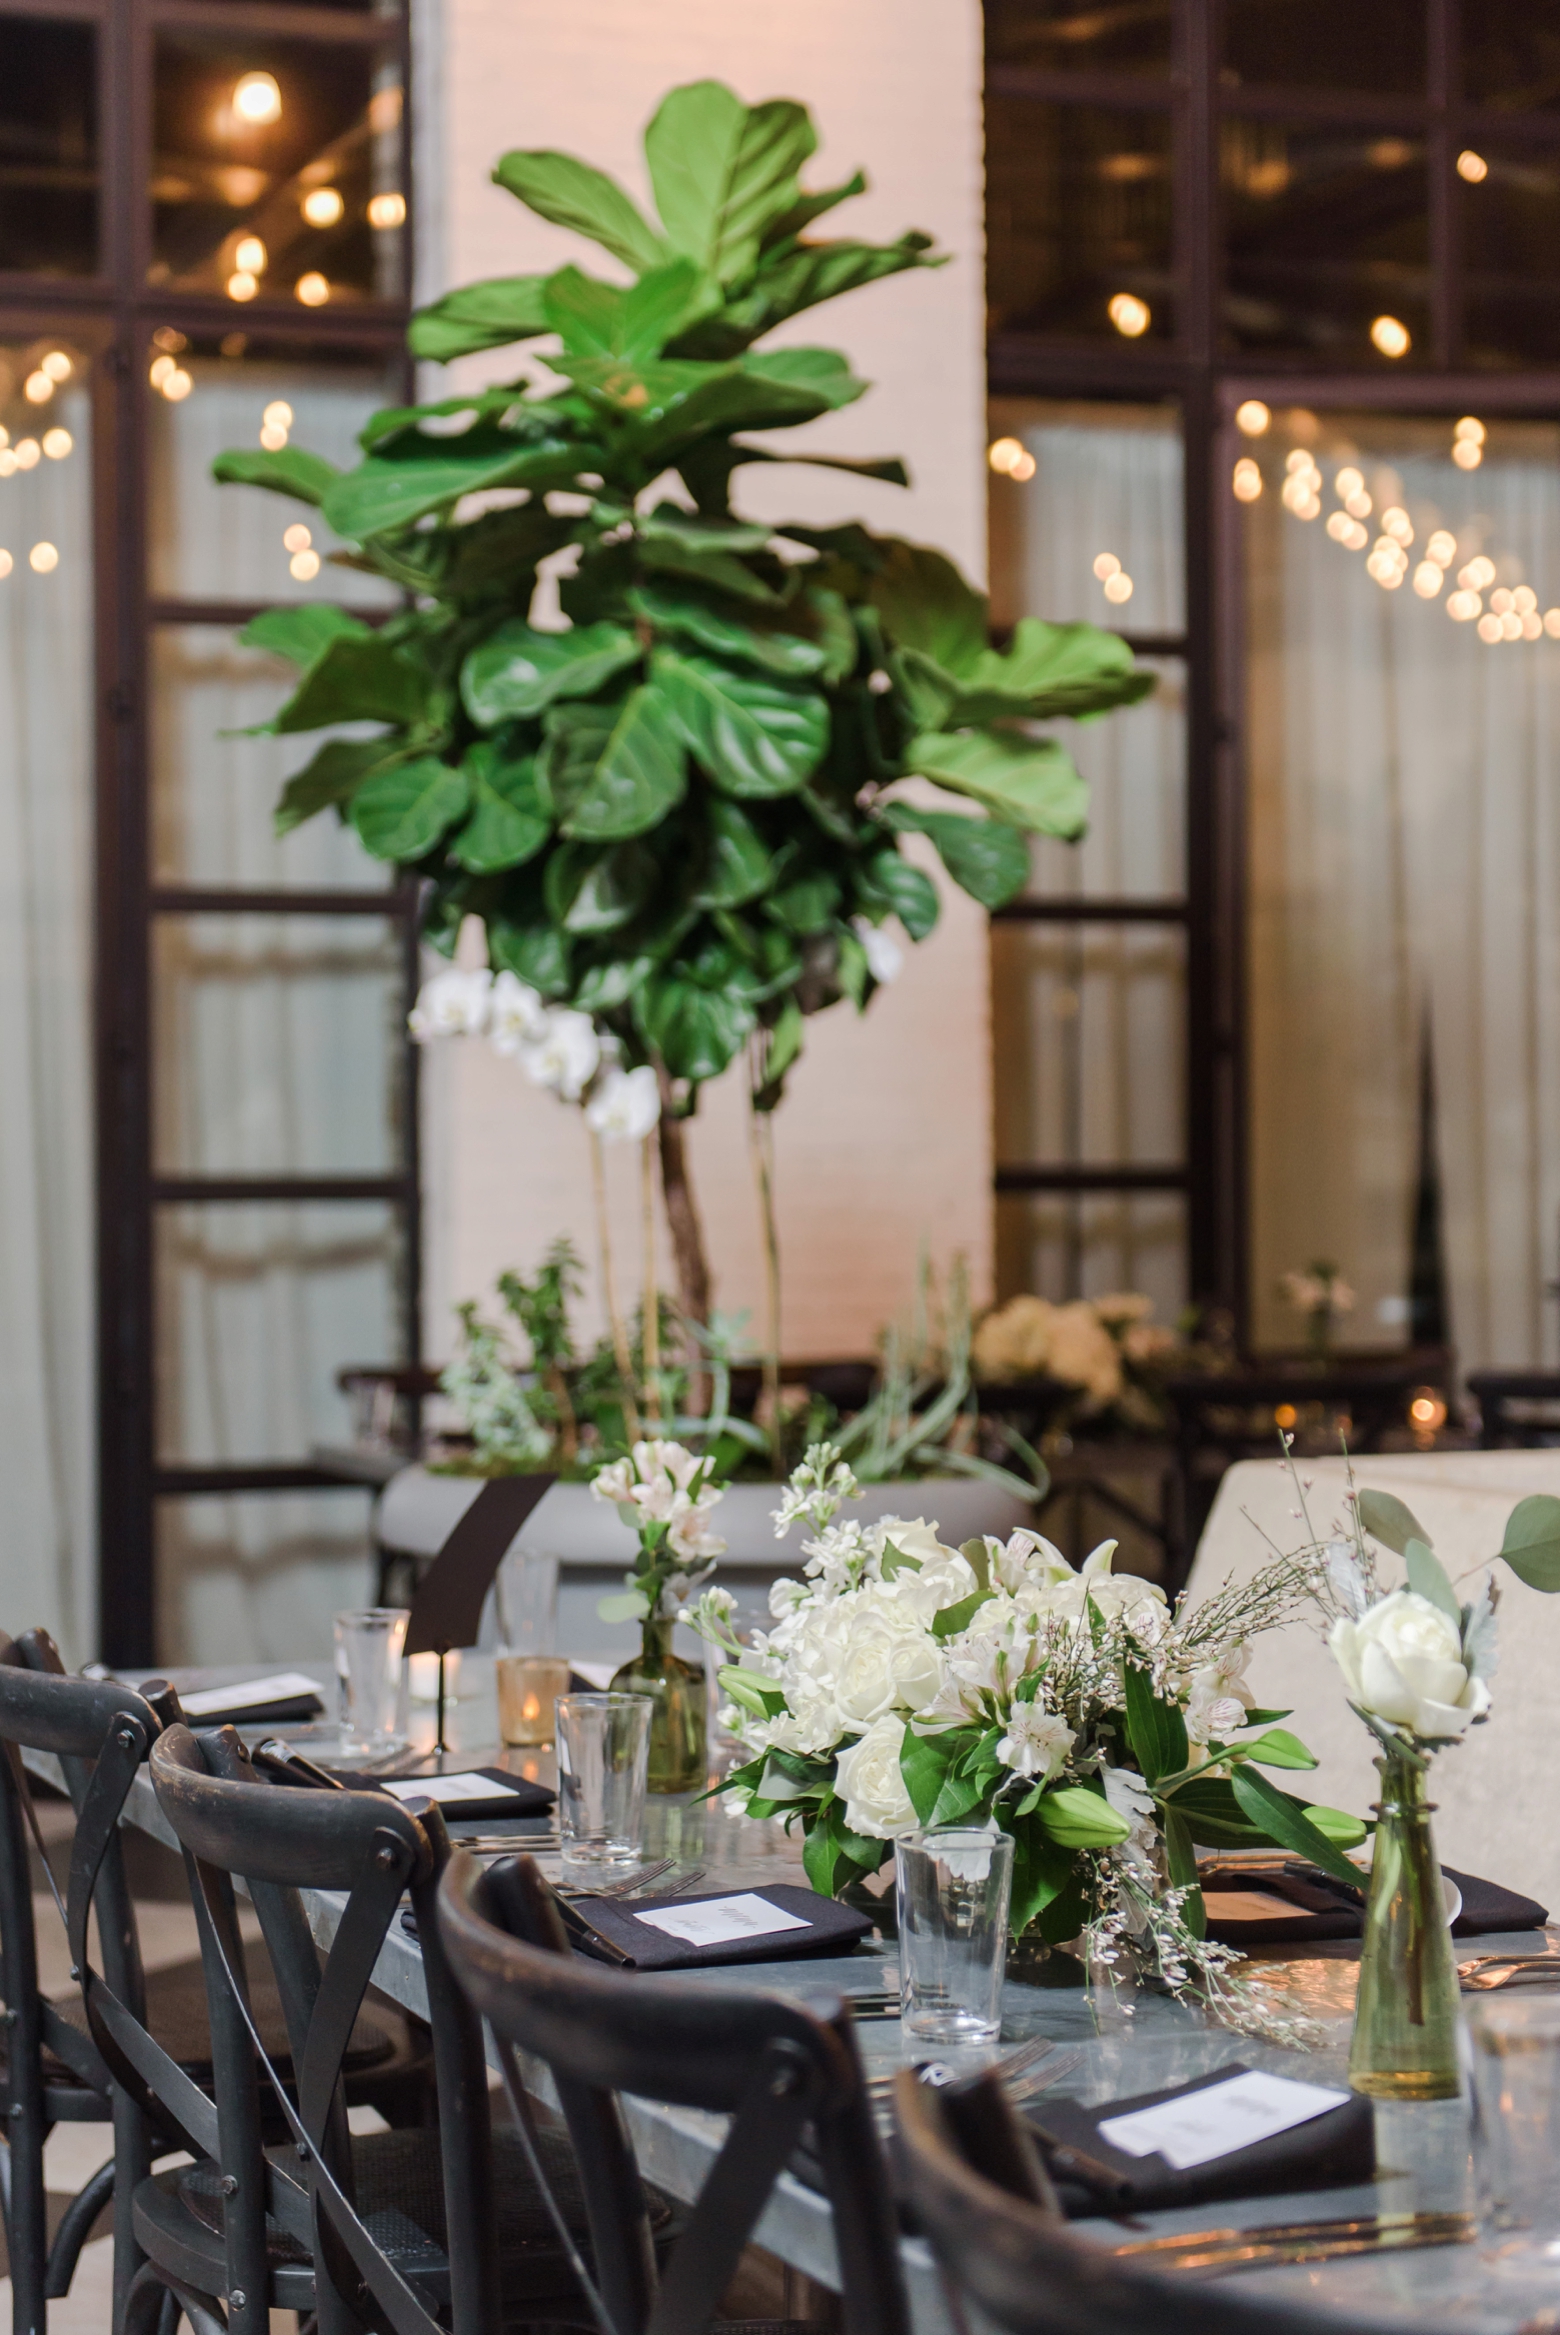 Wedding reception with small floral centerpieces and string lights